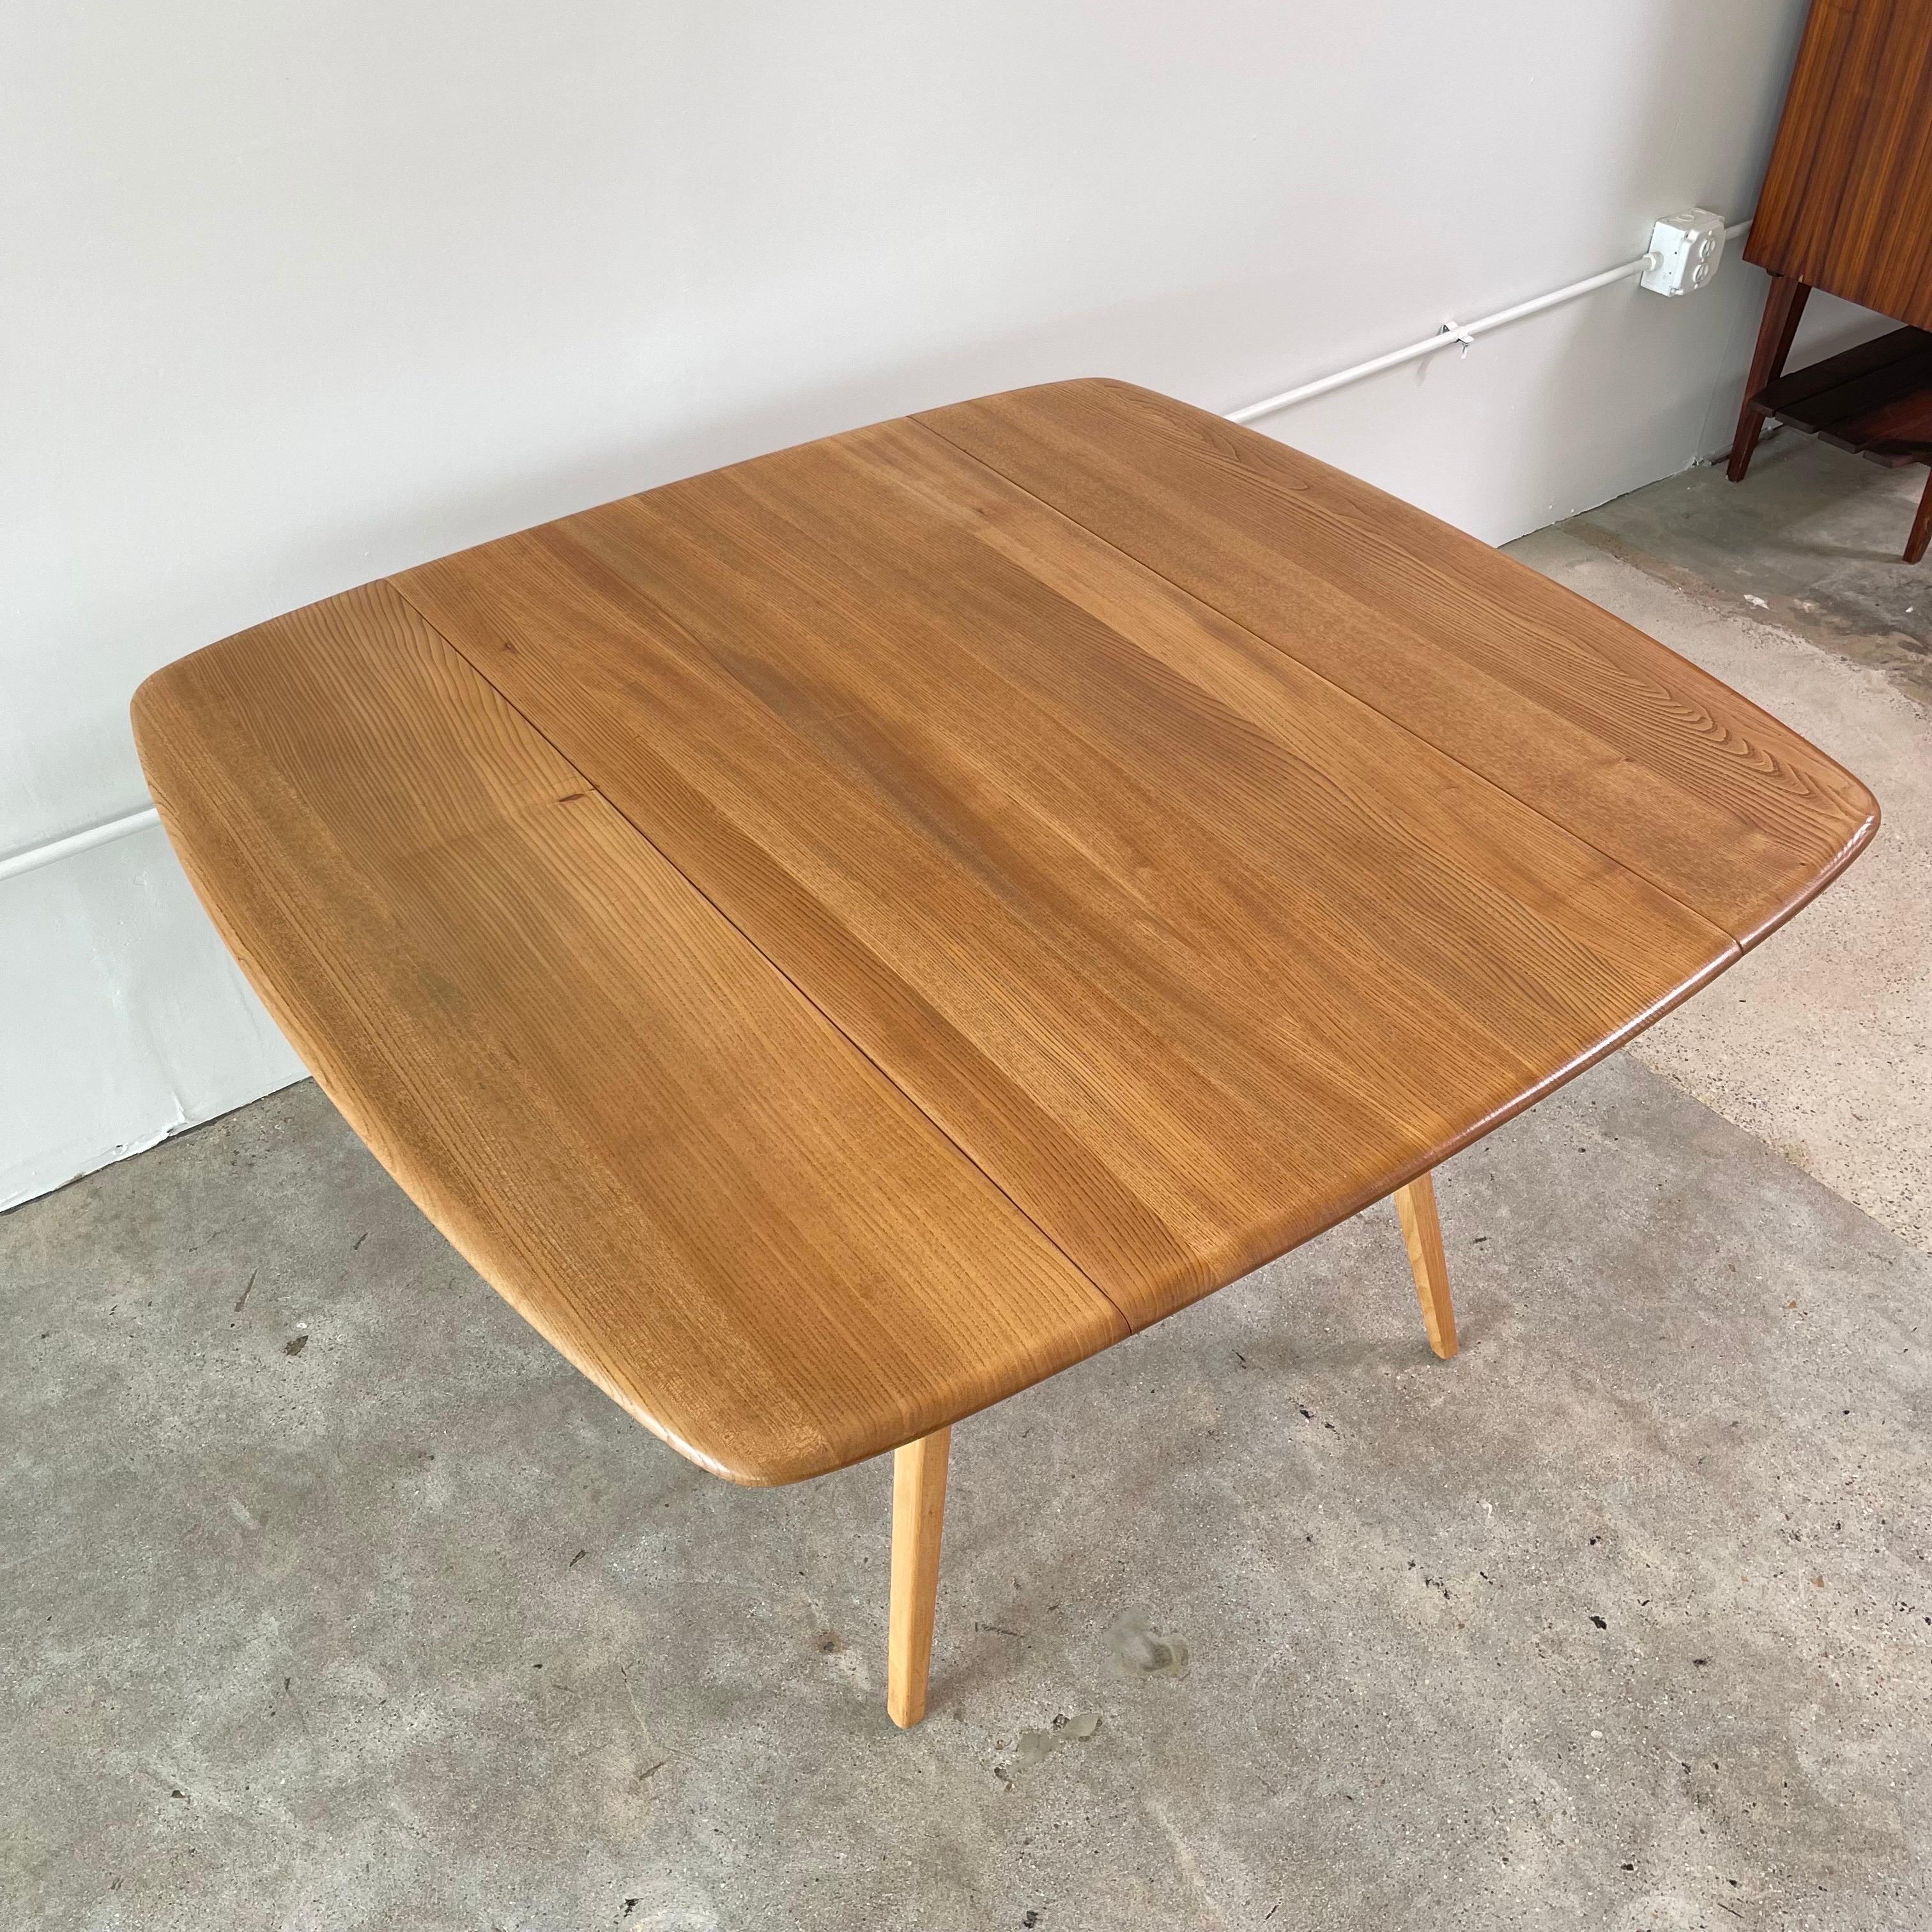 20th Century Solid Elm Drop Leaf Table by Ercol